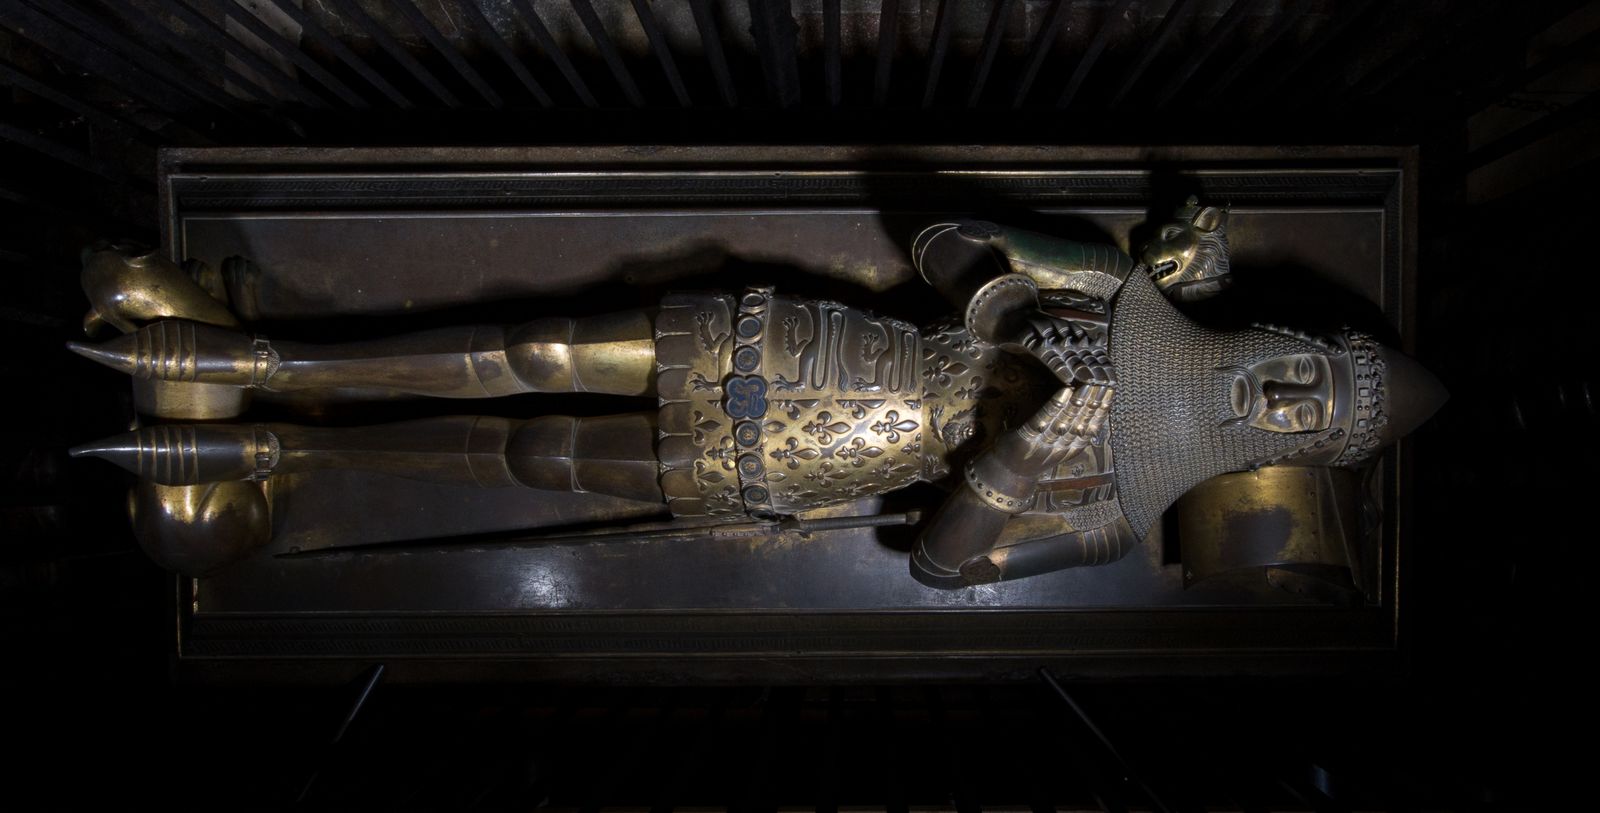 Thanks to Medical Technology, the Black Prince's Tomb Reveals Its Secrets, Smart News